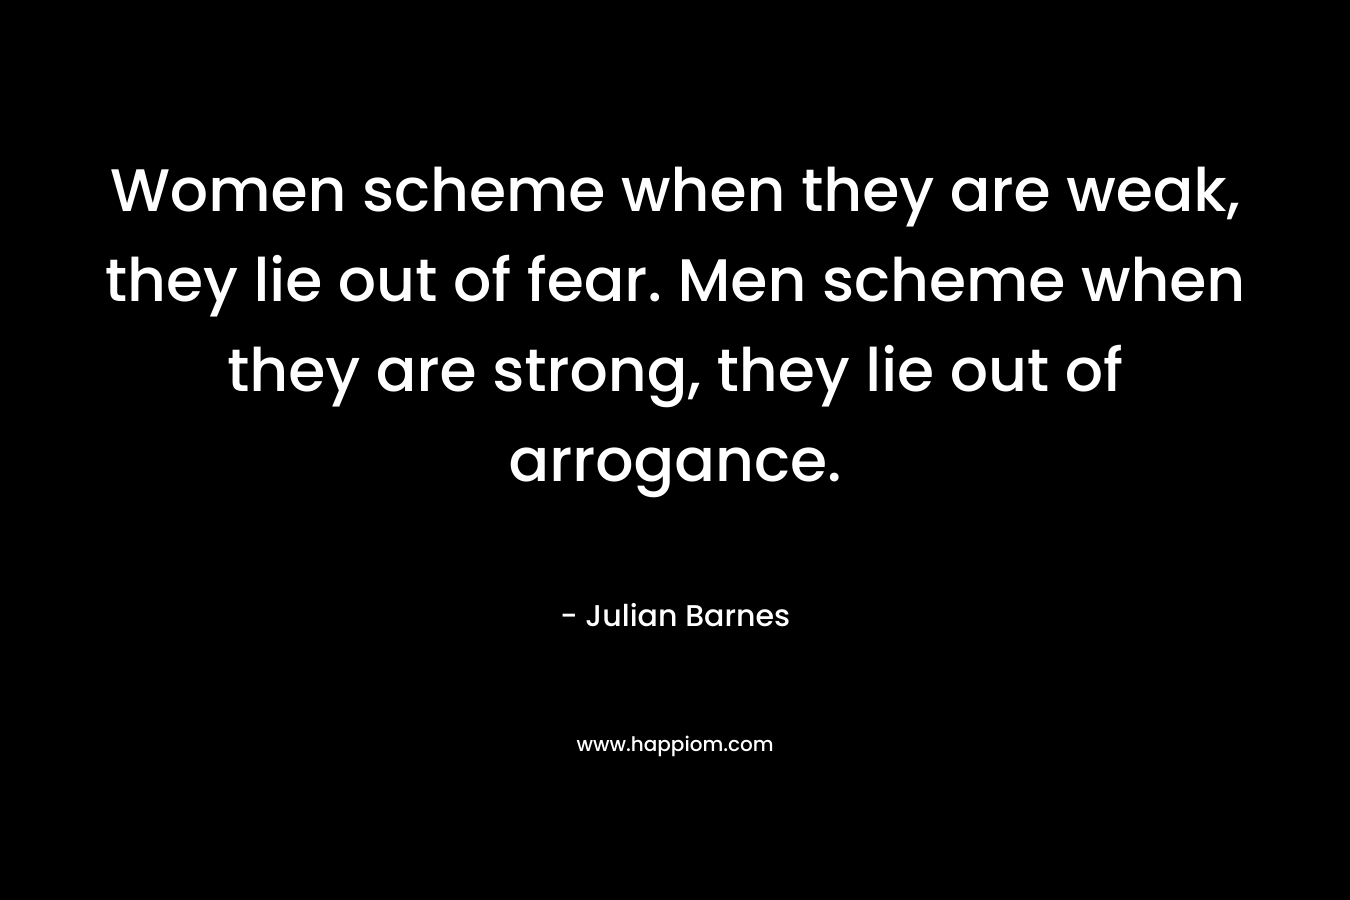 Women scheme when they are weak, they lie out of fear. Men scheme when they are strong, they lie out of arrogance.